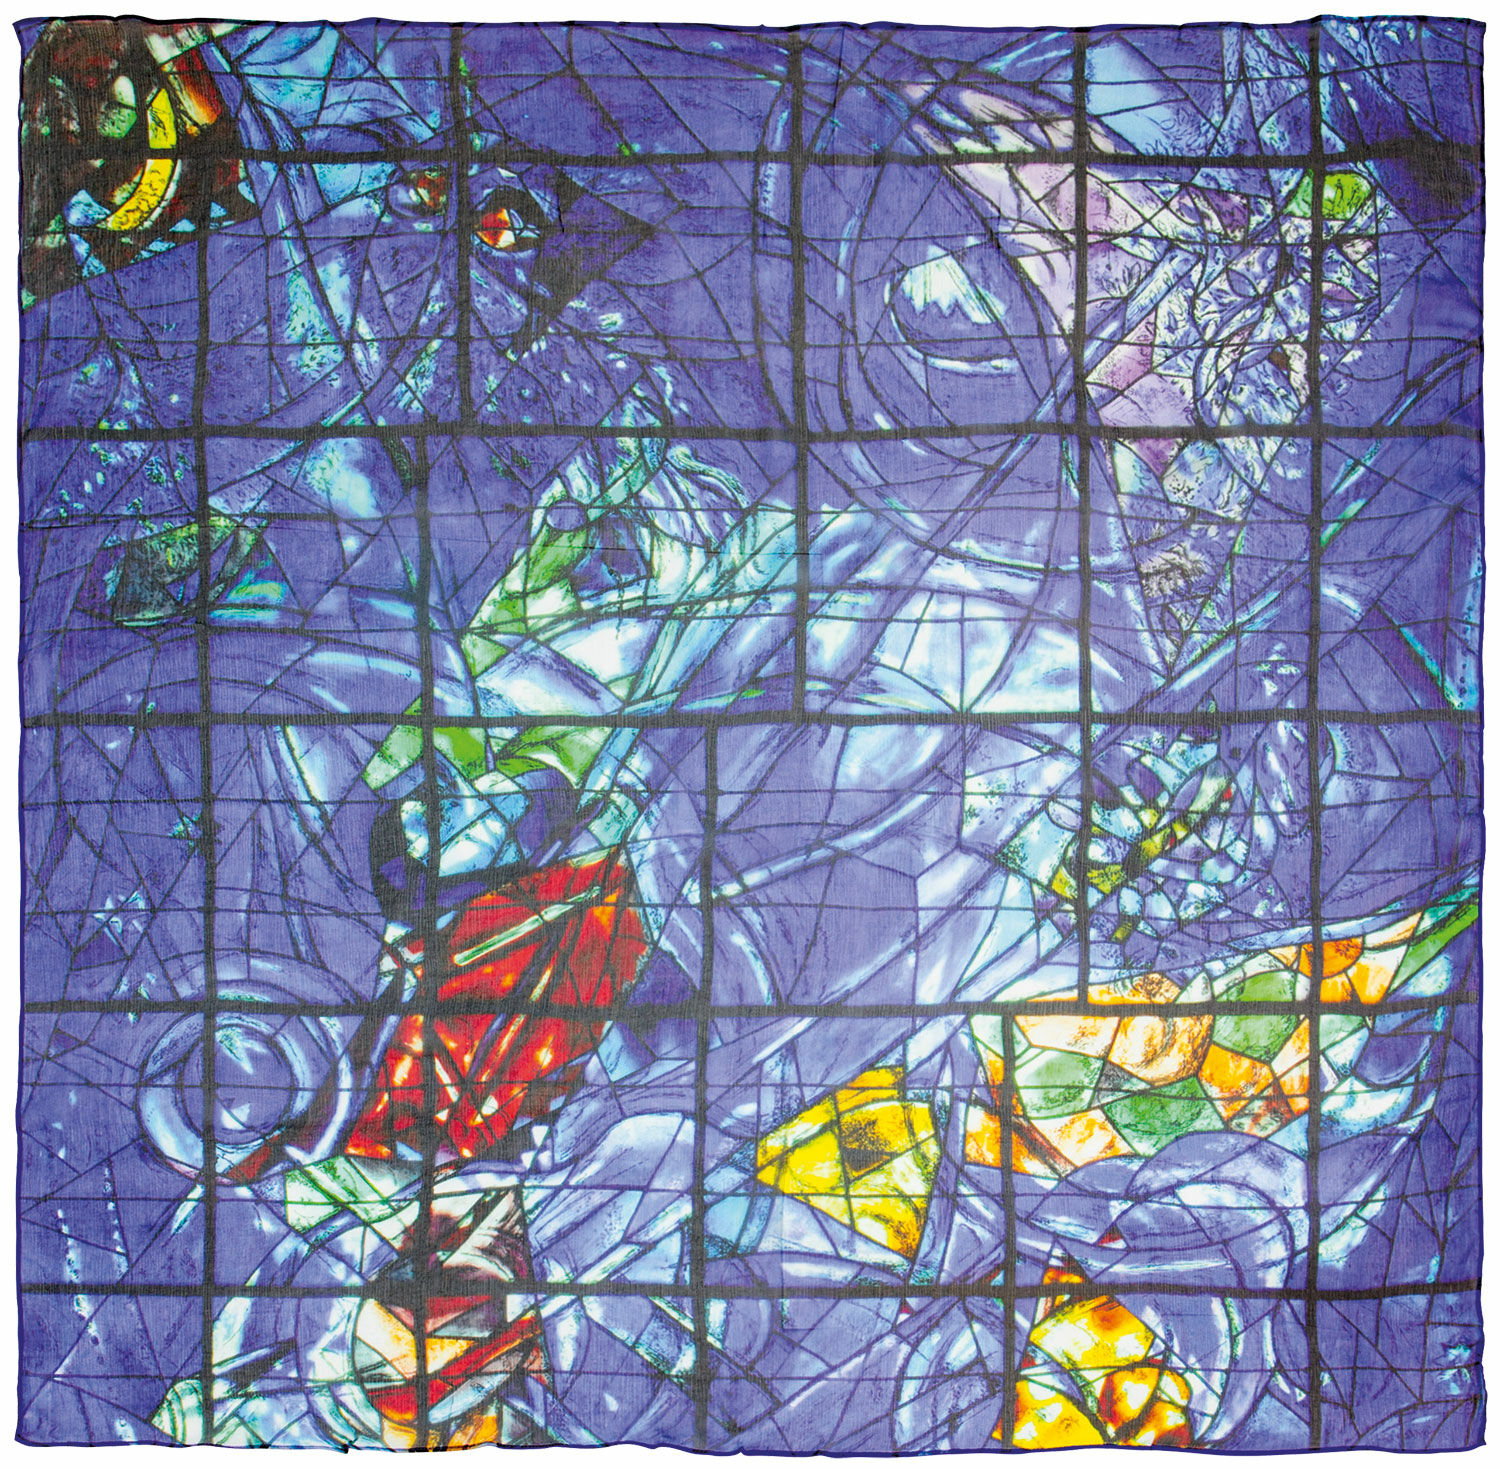 Silk scarf "The Creation of the World" by Marc Chagall